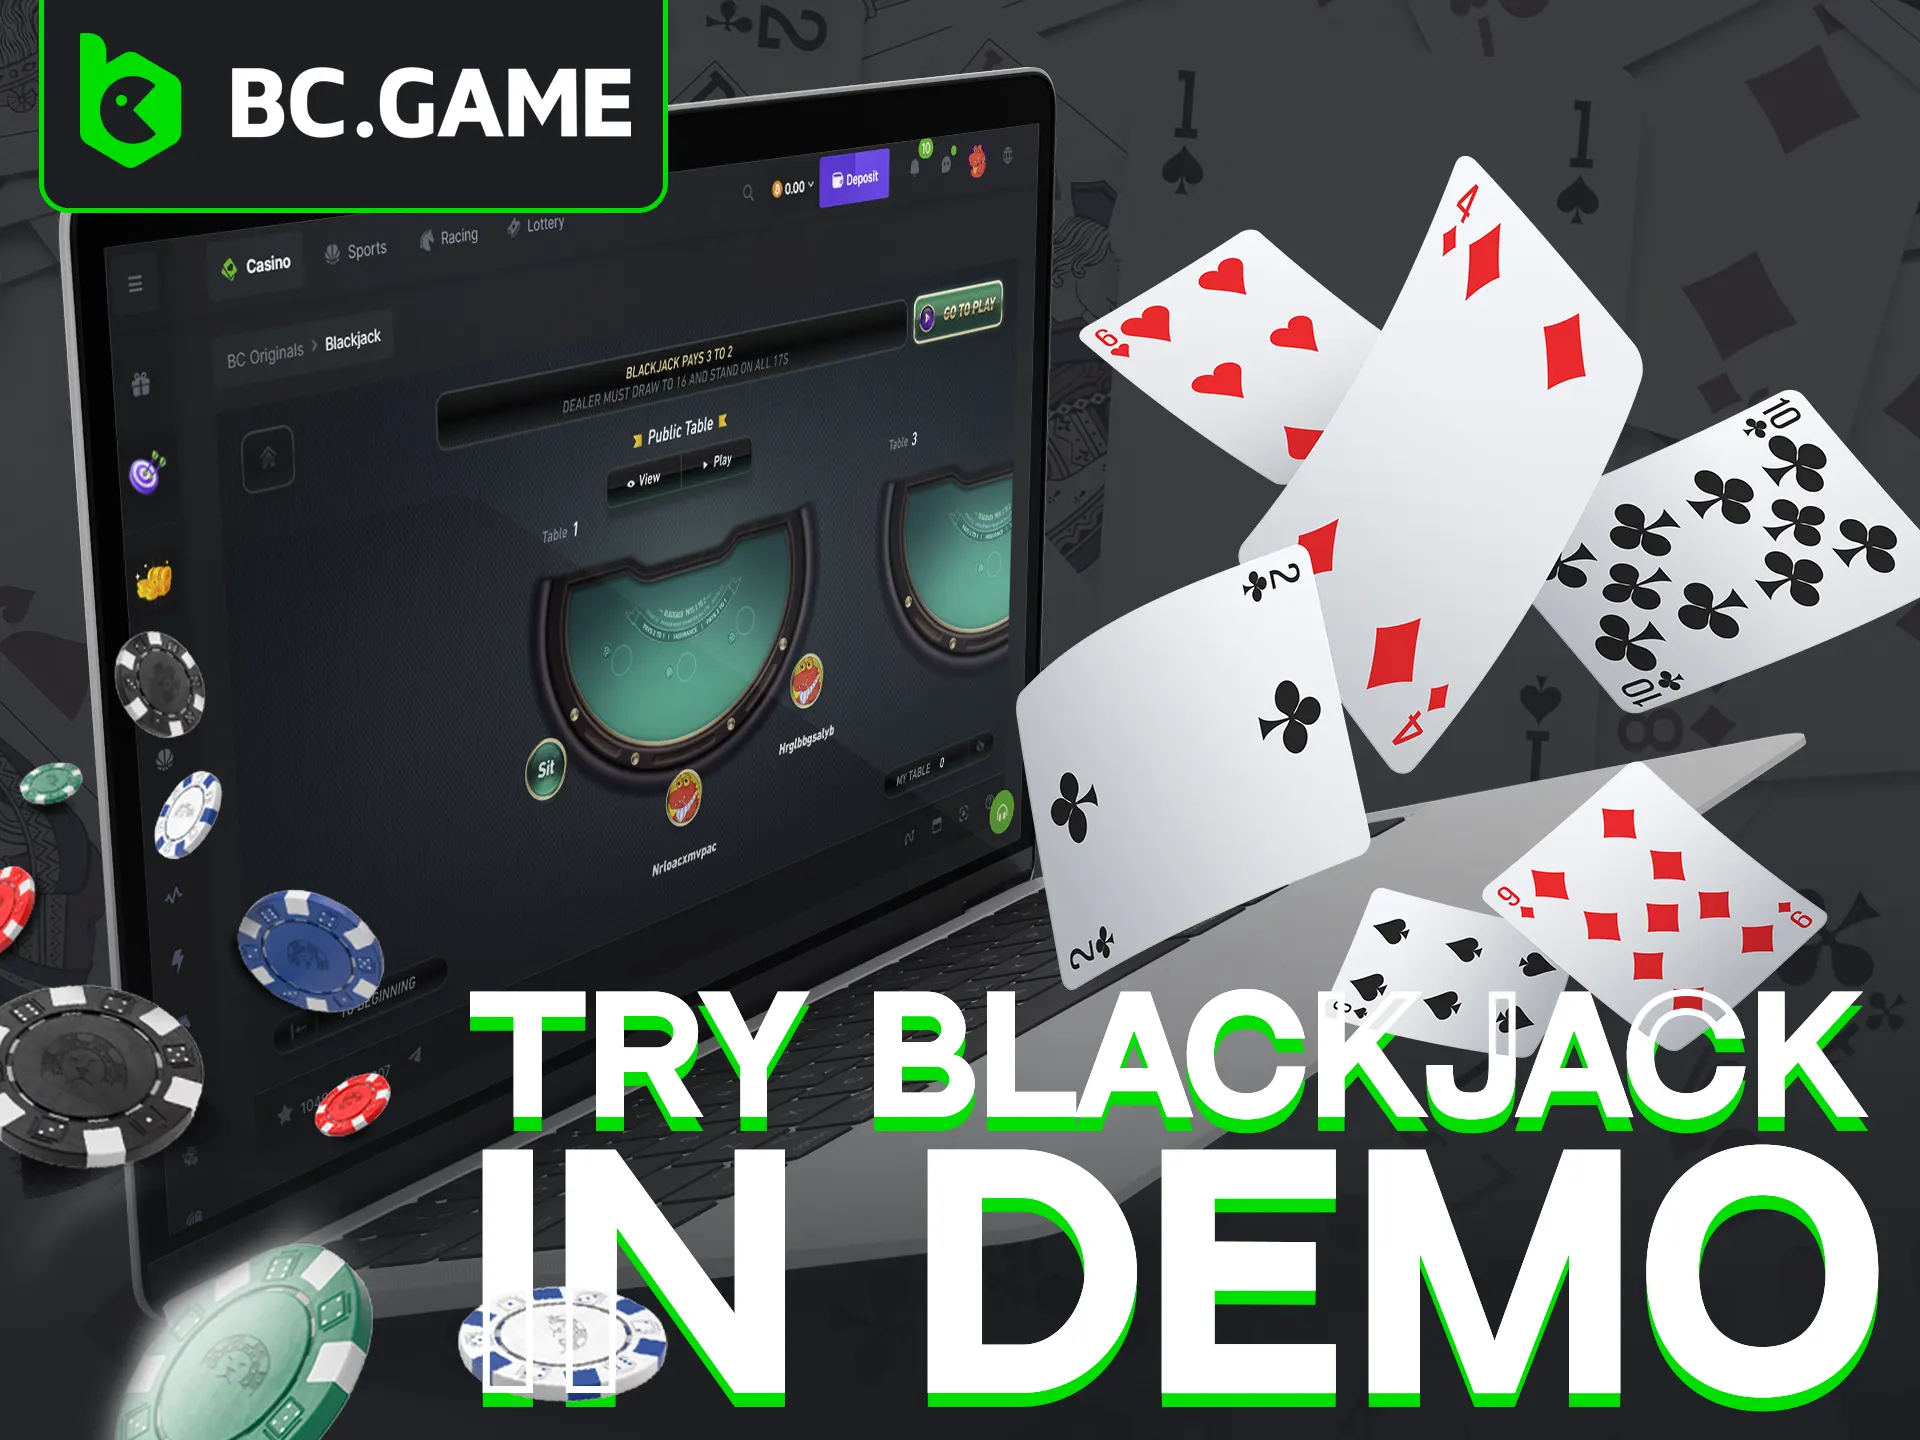 Practice Blackjack for free in Demo Mode at BC Game.